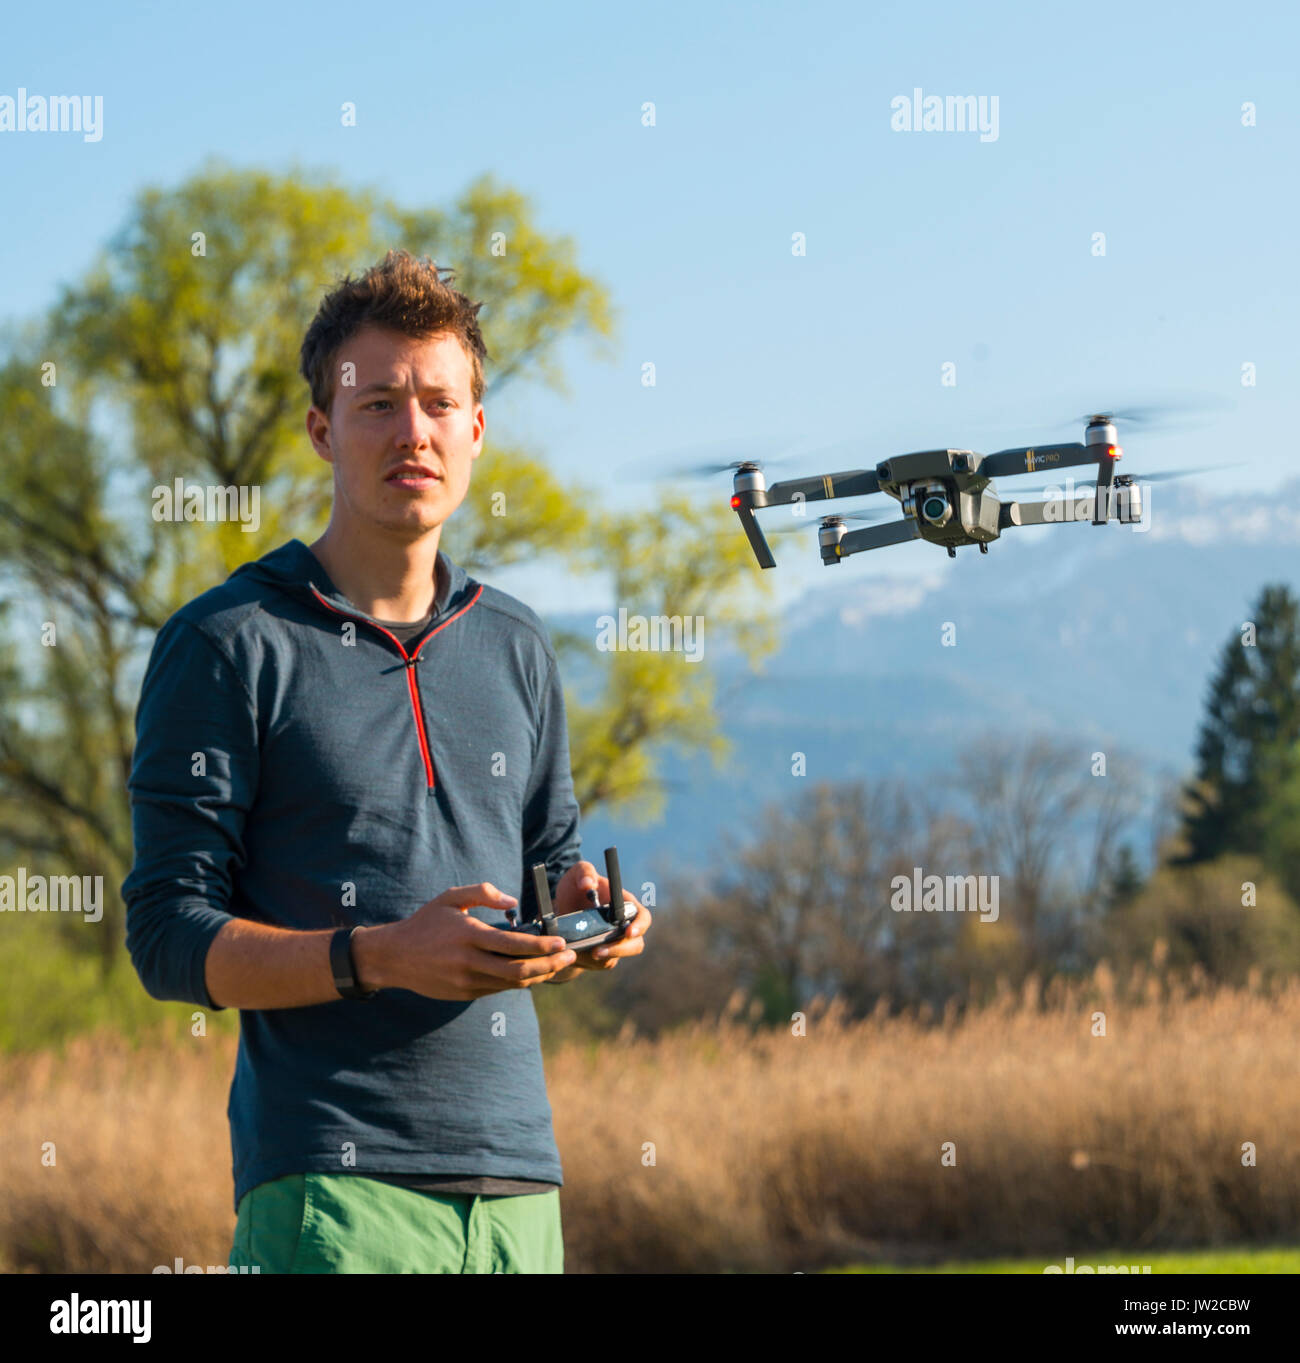 Young man controlling flying quadrocopter, remote controlled drone with camera, DJI Mavic Stock Photo